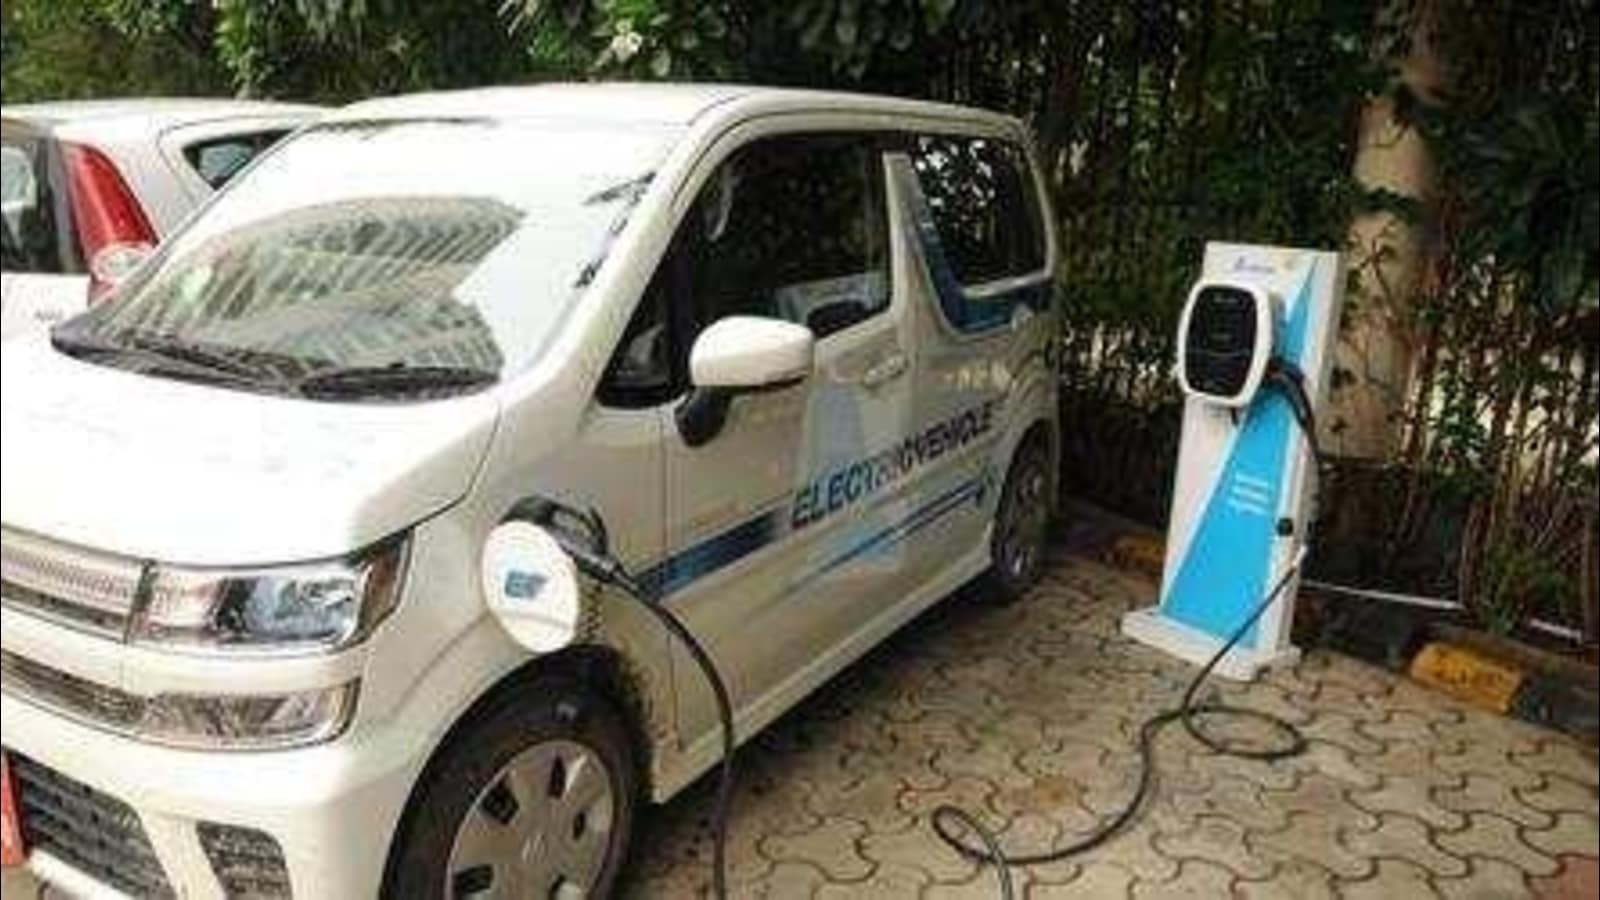 Chandigarh all set to go green with new electric vehicle policy